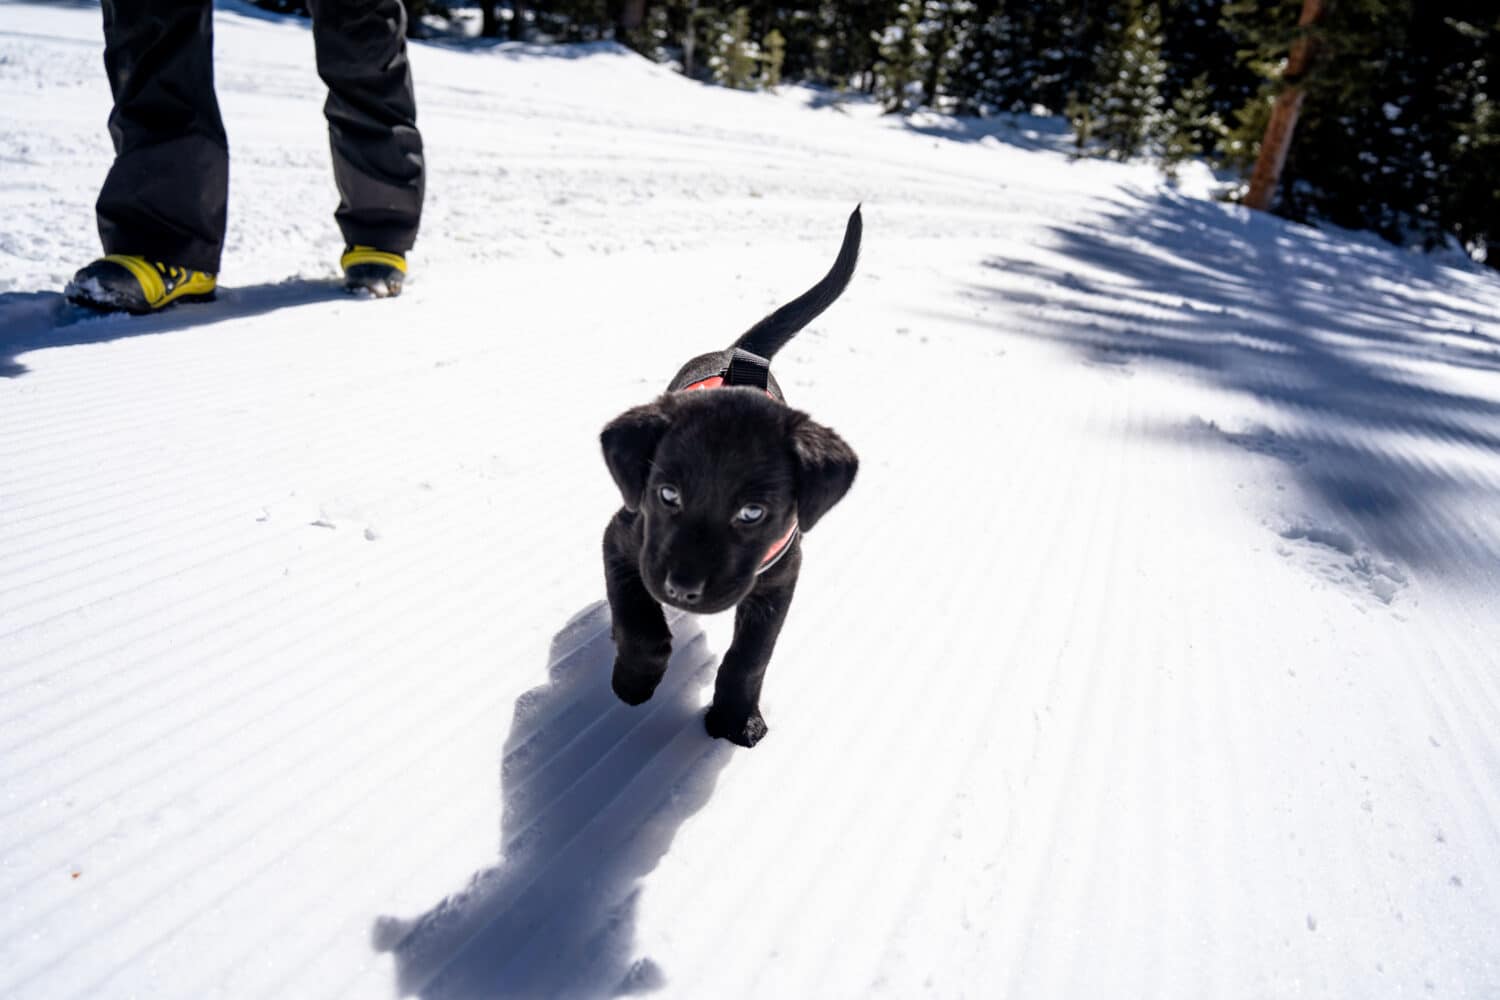 Meet Ember the Avalanche puppy